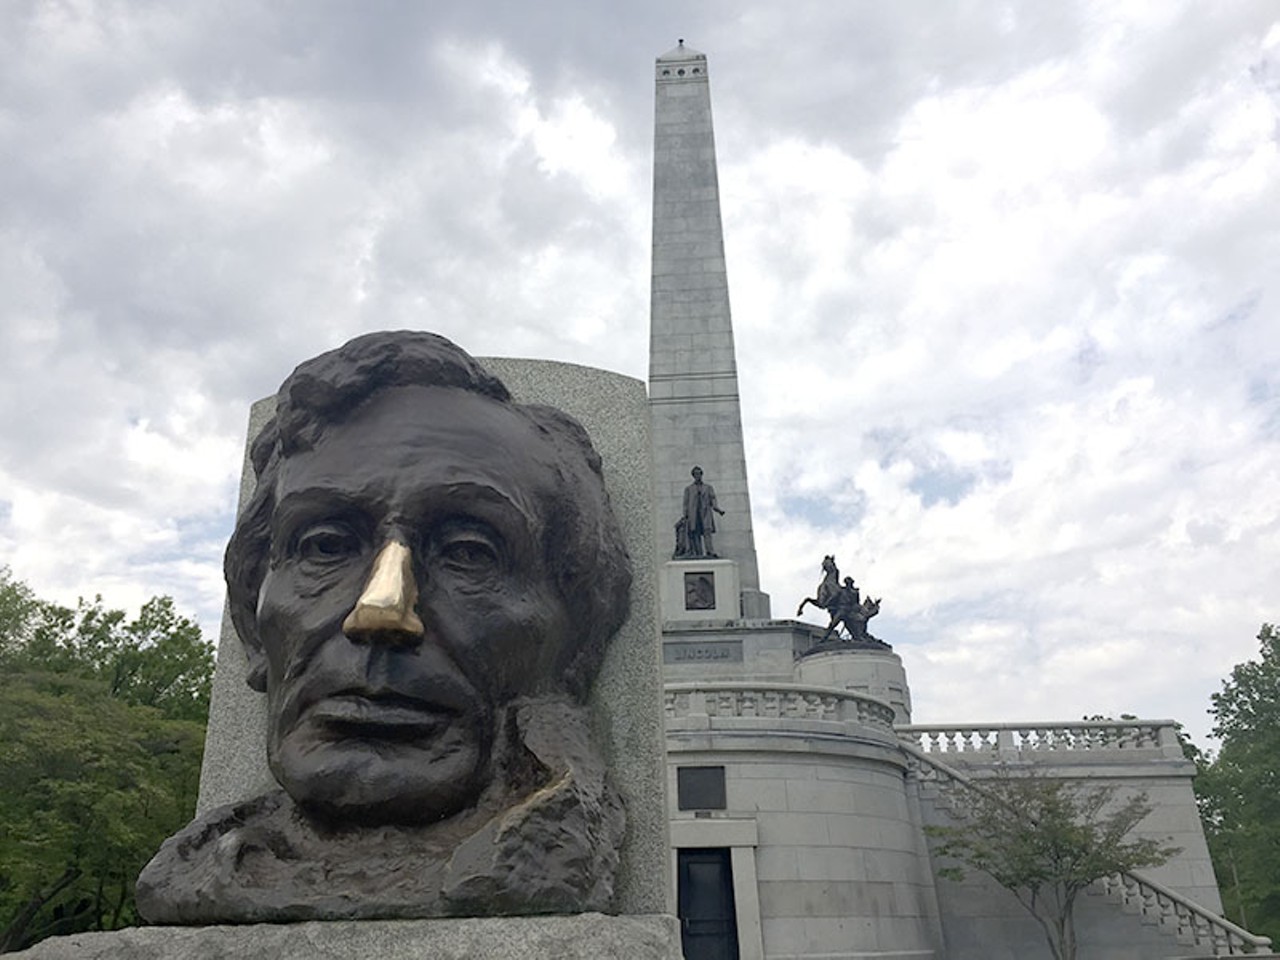 As for Lincoln's tomb, it's a quick and interesting introduction to the many remembrances in Springfield. A statue of him out front is dull bronze except for the gleaming nose, polished by the hands of thousands of visitors. A heavy door at the base of the tomb provides (free!) access to curved, marble hallways adorned with more Lincoln statues and plaques engraved with excerpts from his speeches. You eventually come to the burial chamber. Lincoln's remains lie ten feet below the floor, and his wife, Mary, and three of his boys are in crypts along the south wall. Photo by Jenna Murphy.